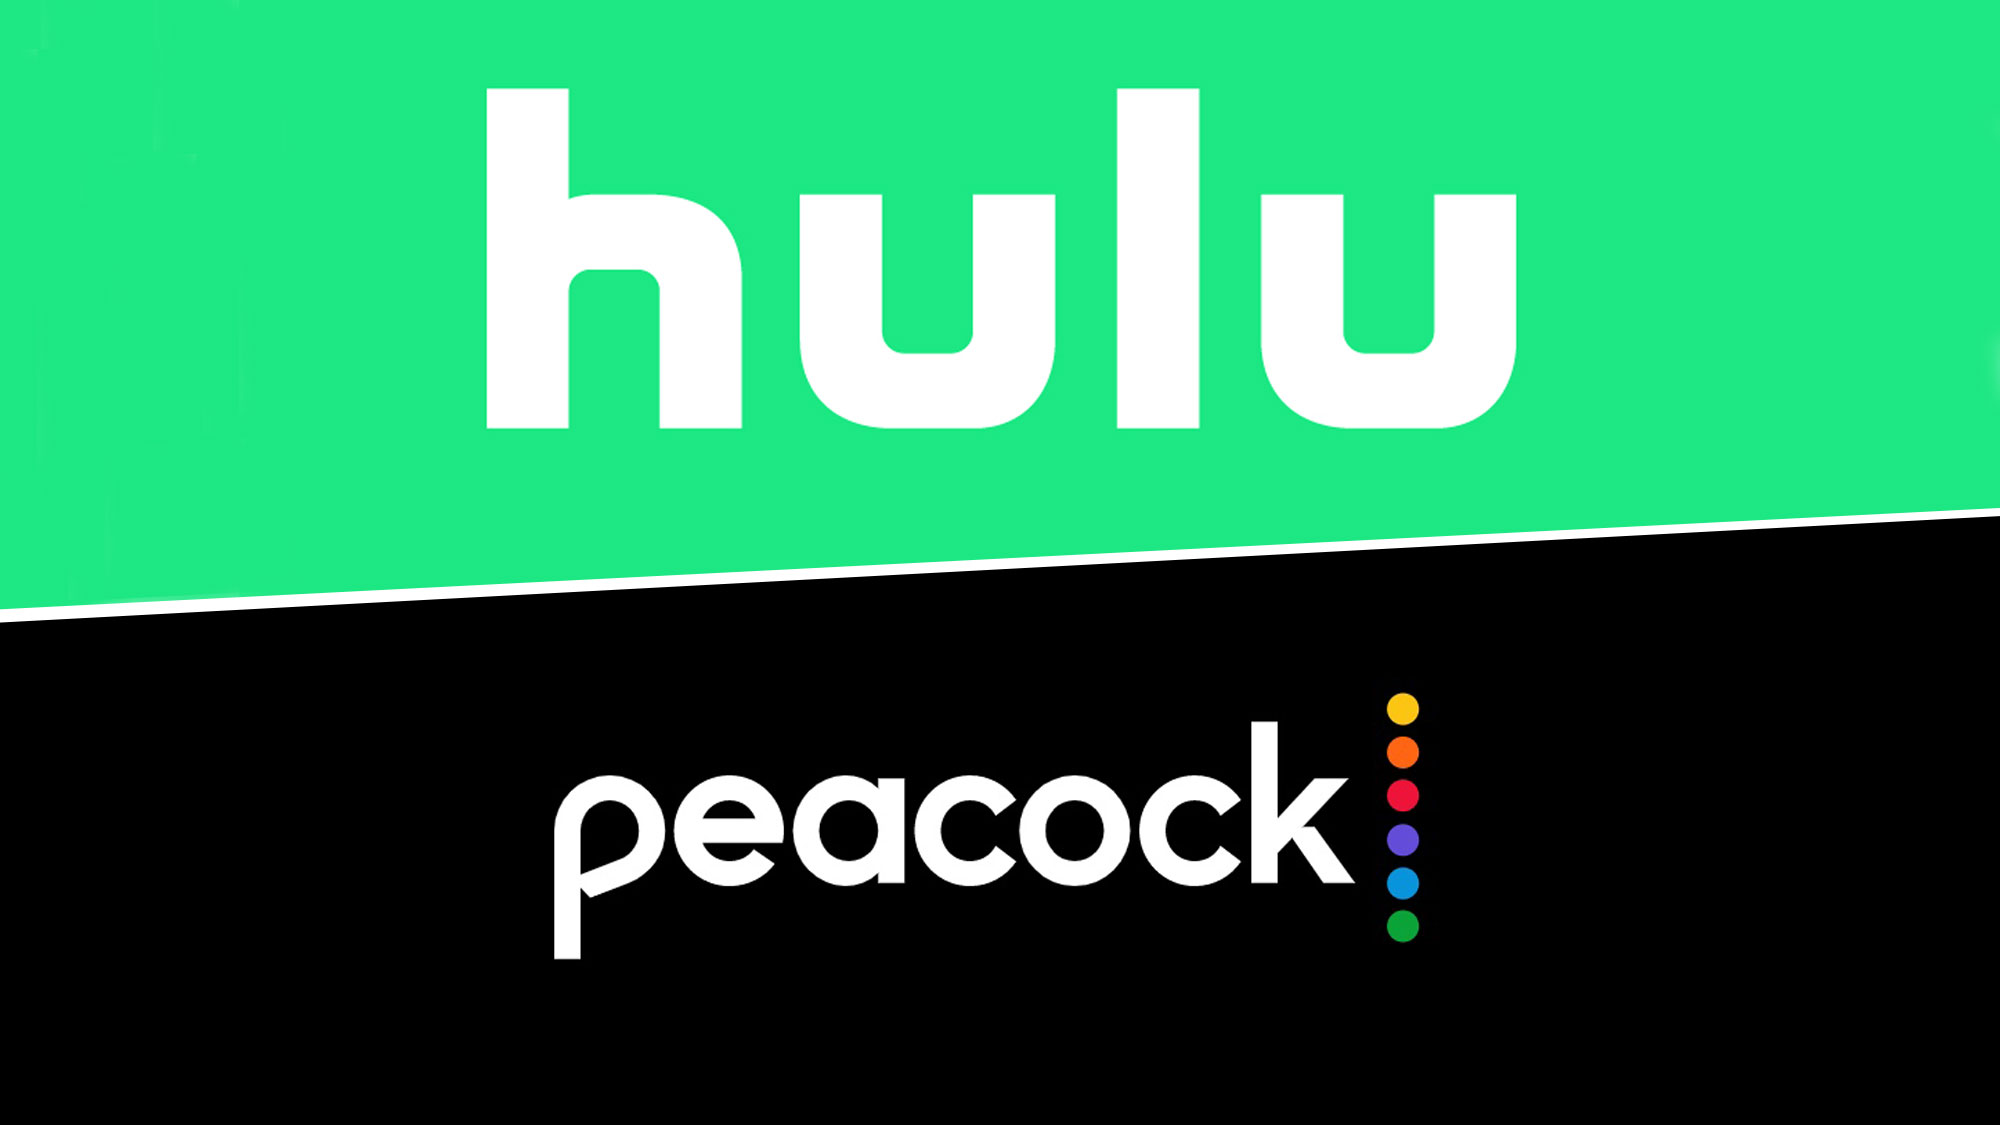 Peacock vs Hulu How does NBC's new streaming service stack up? Tom's